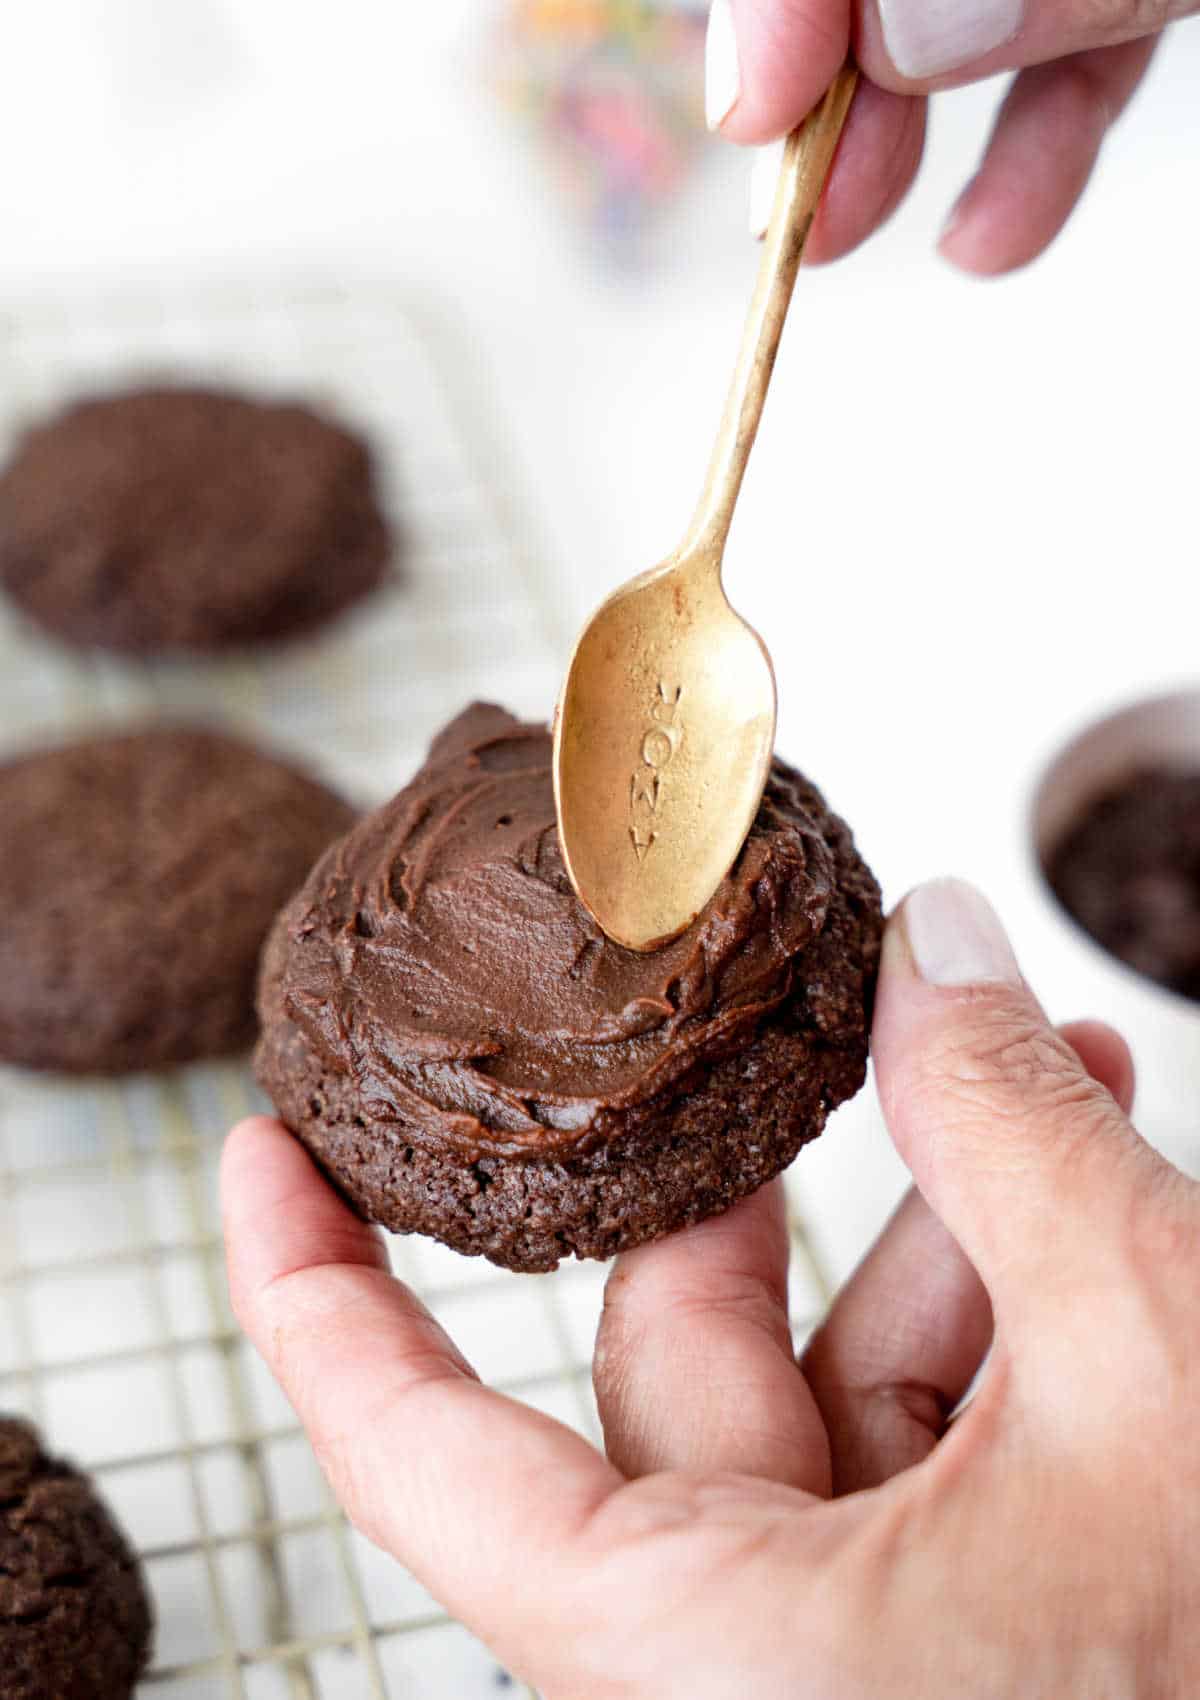 Frosting a chocolate cookie with ganache and a golden spoon. More cookies below. White background.